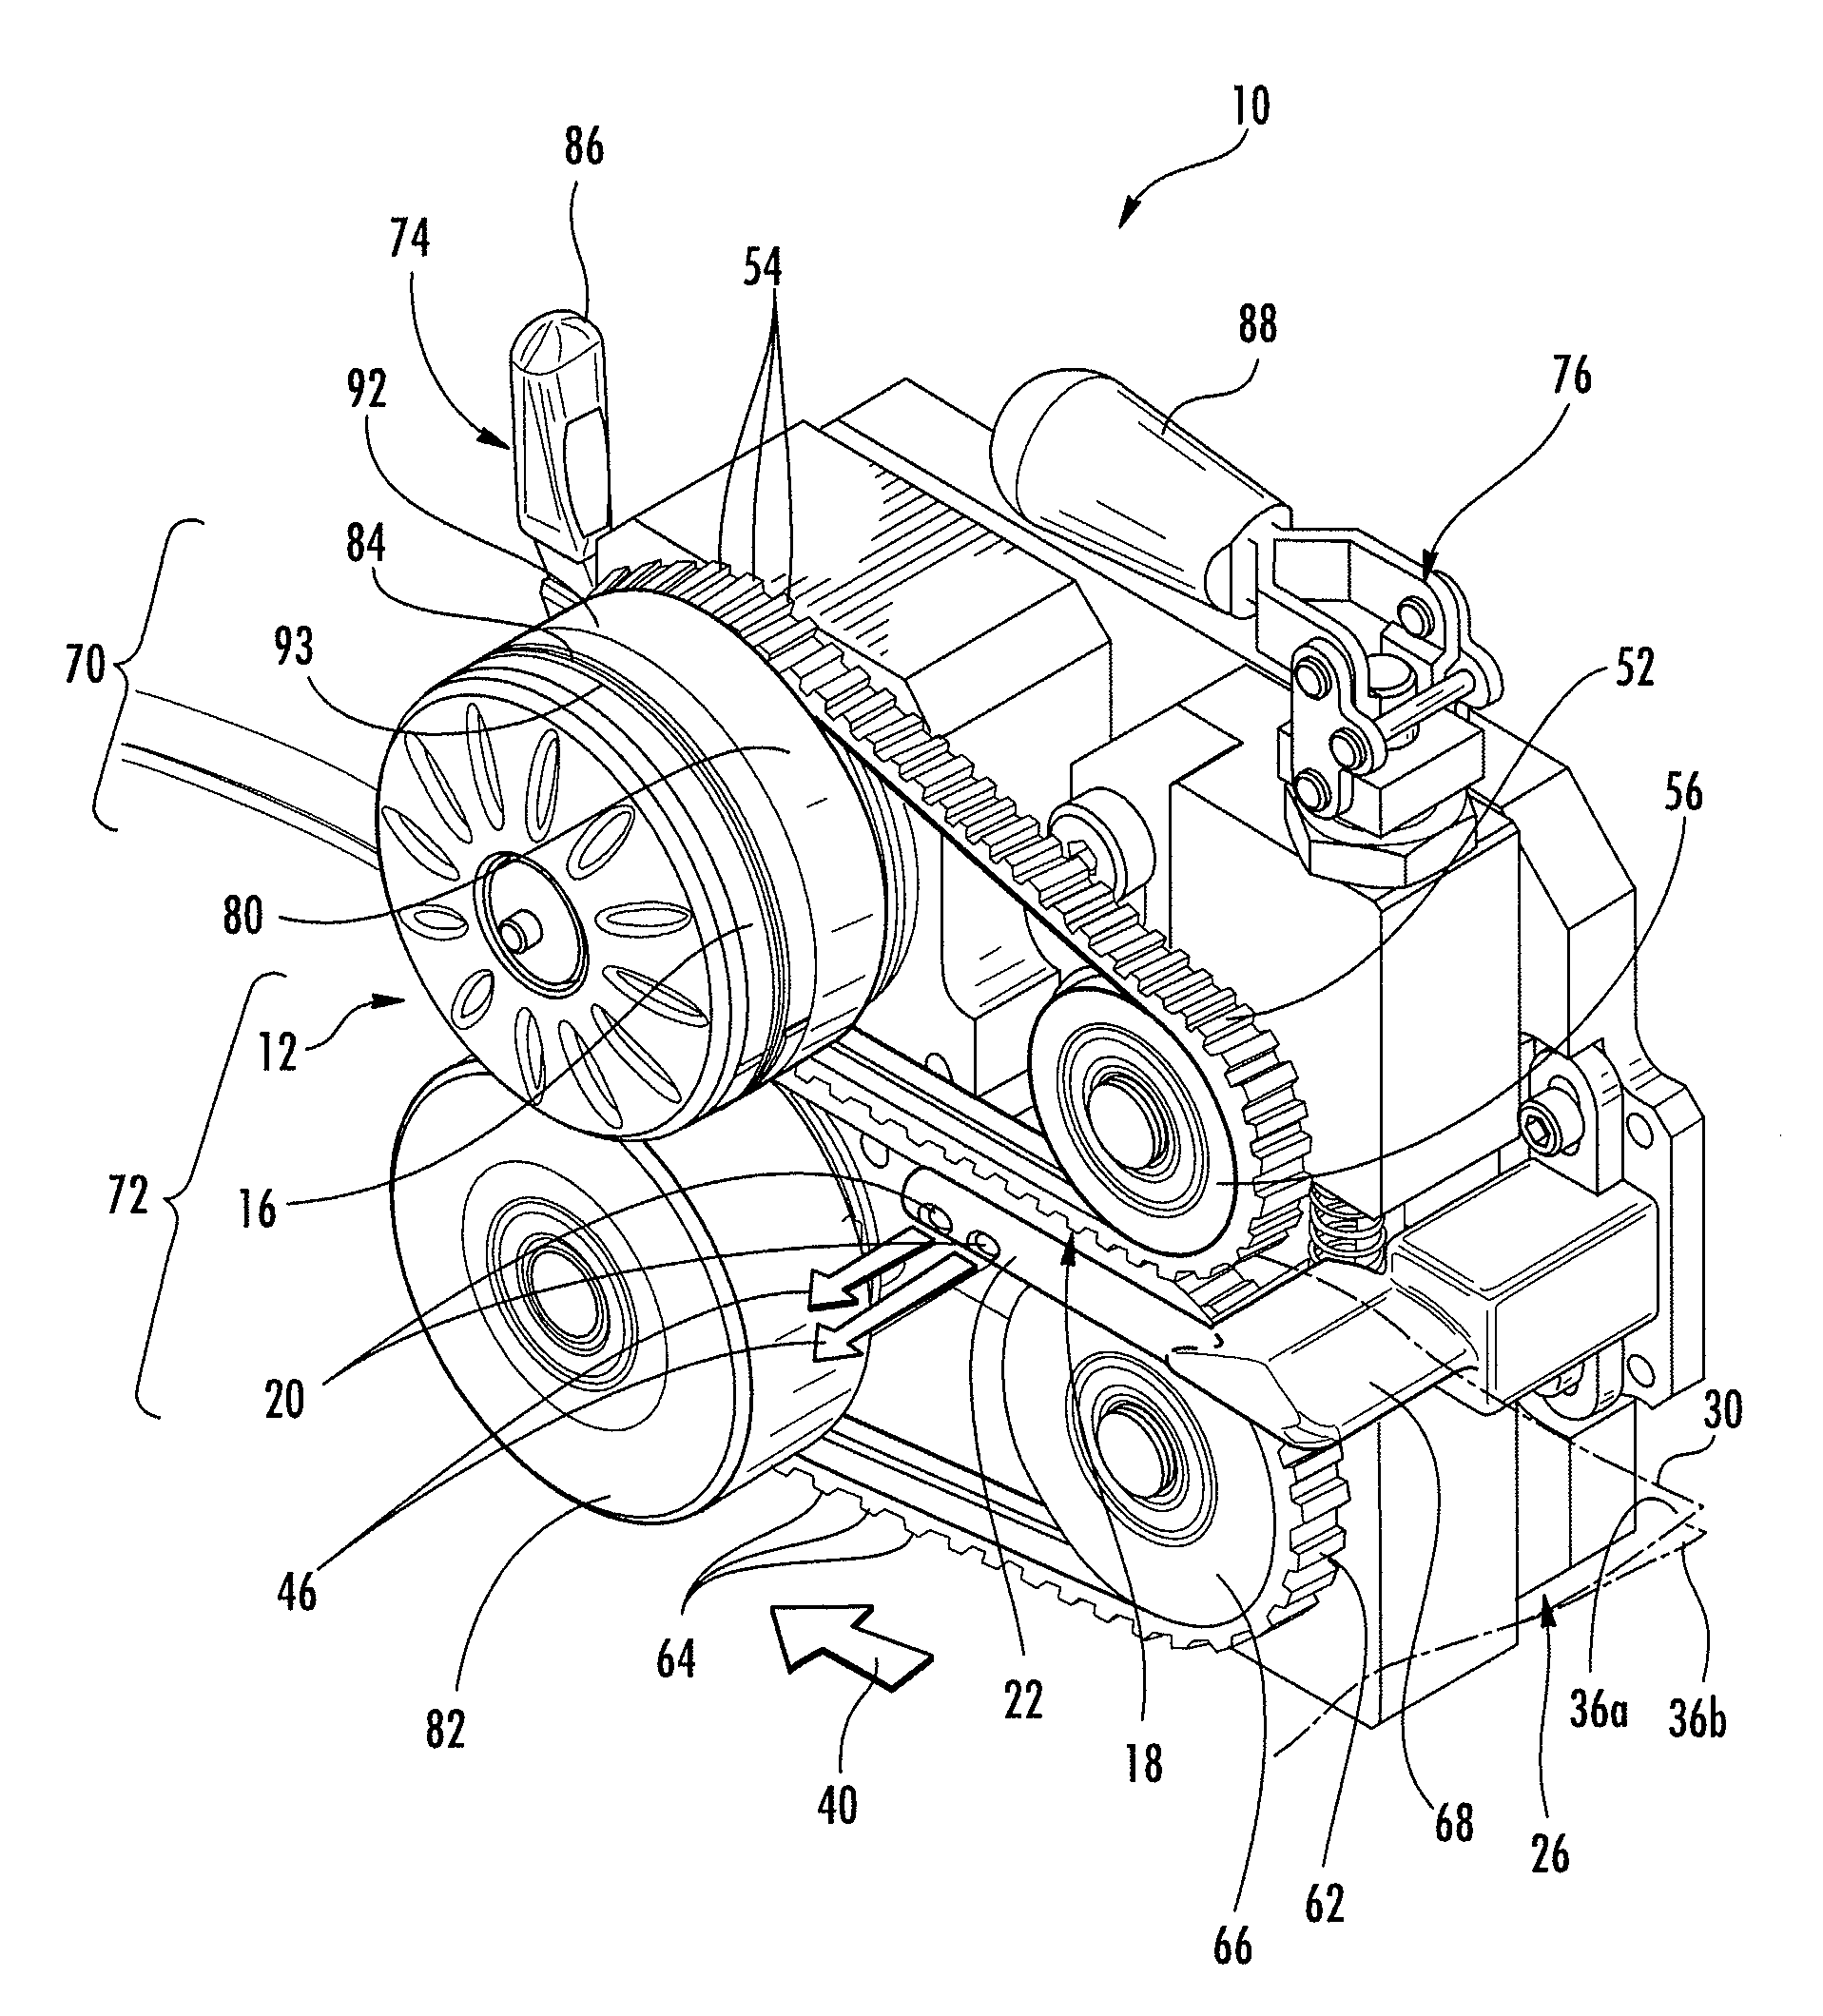 Machine for inflating and sealing an inflatable structure